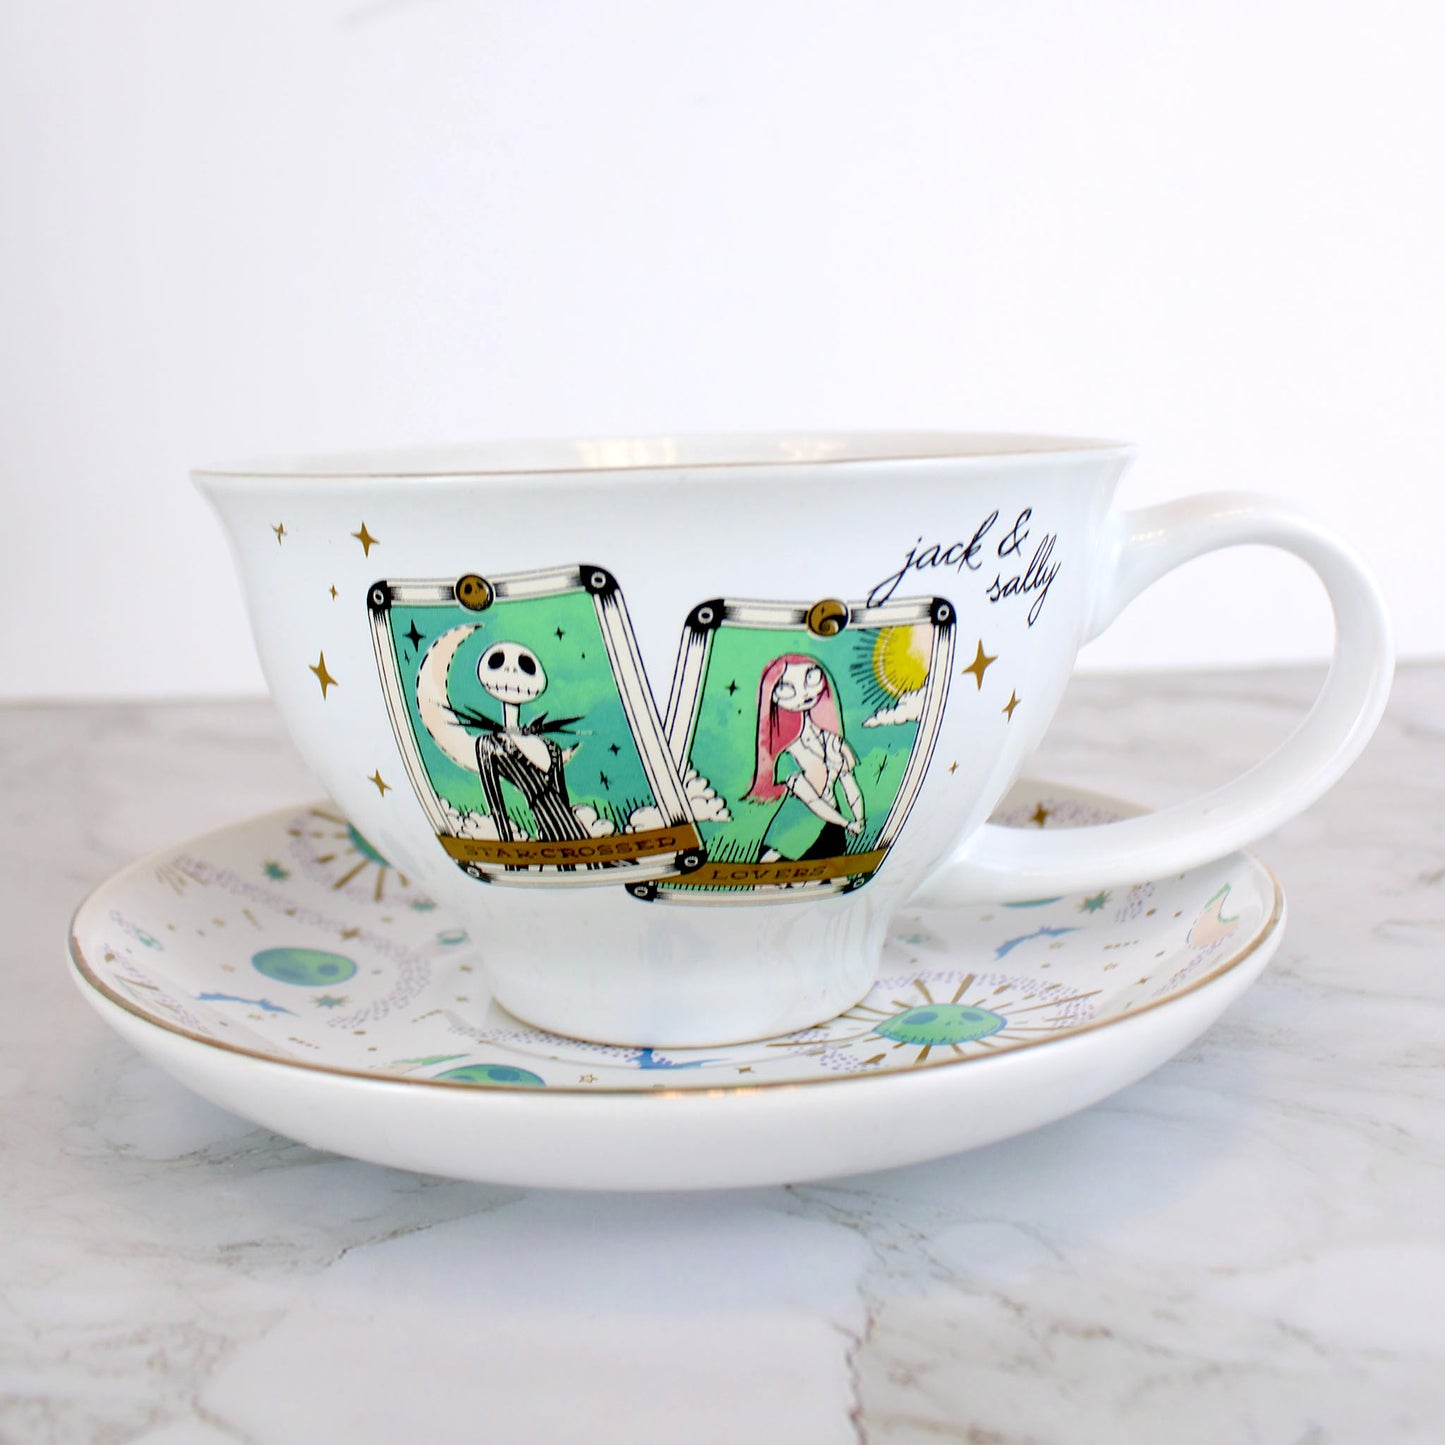 Jack and Sally (The Nightmare Before Christmas) Disney 12oz Ceramic Teacup and Saucer Set